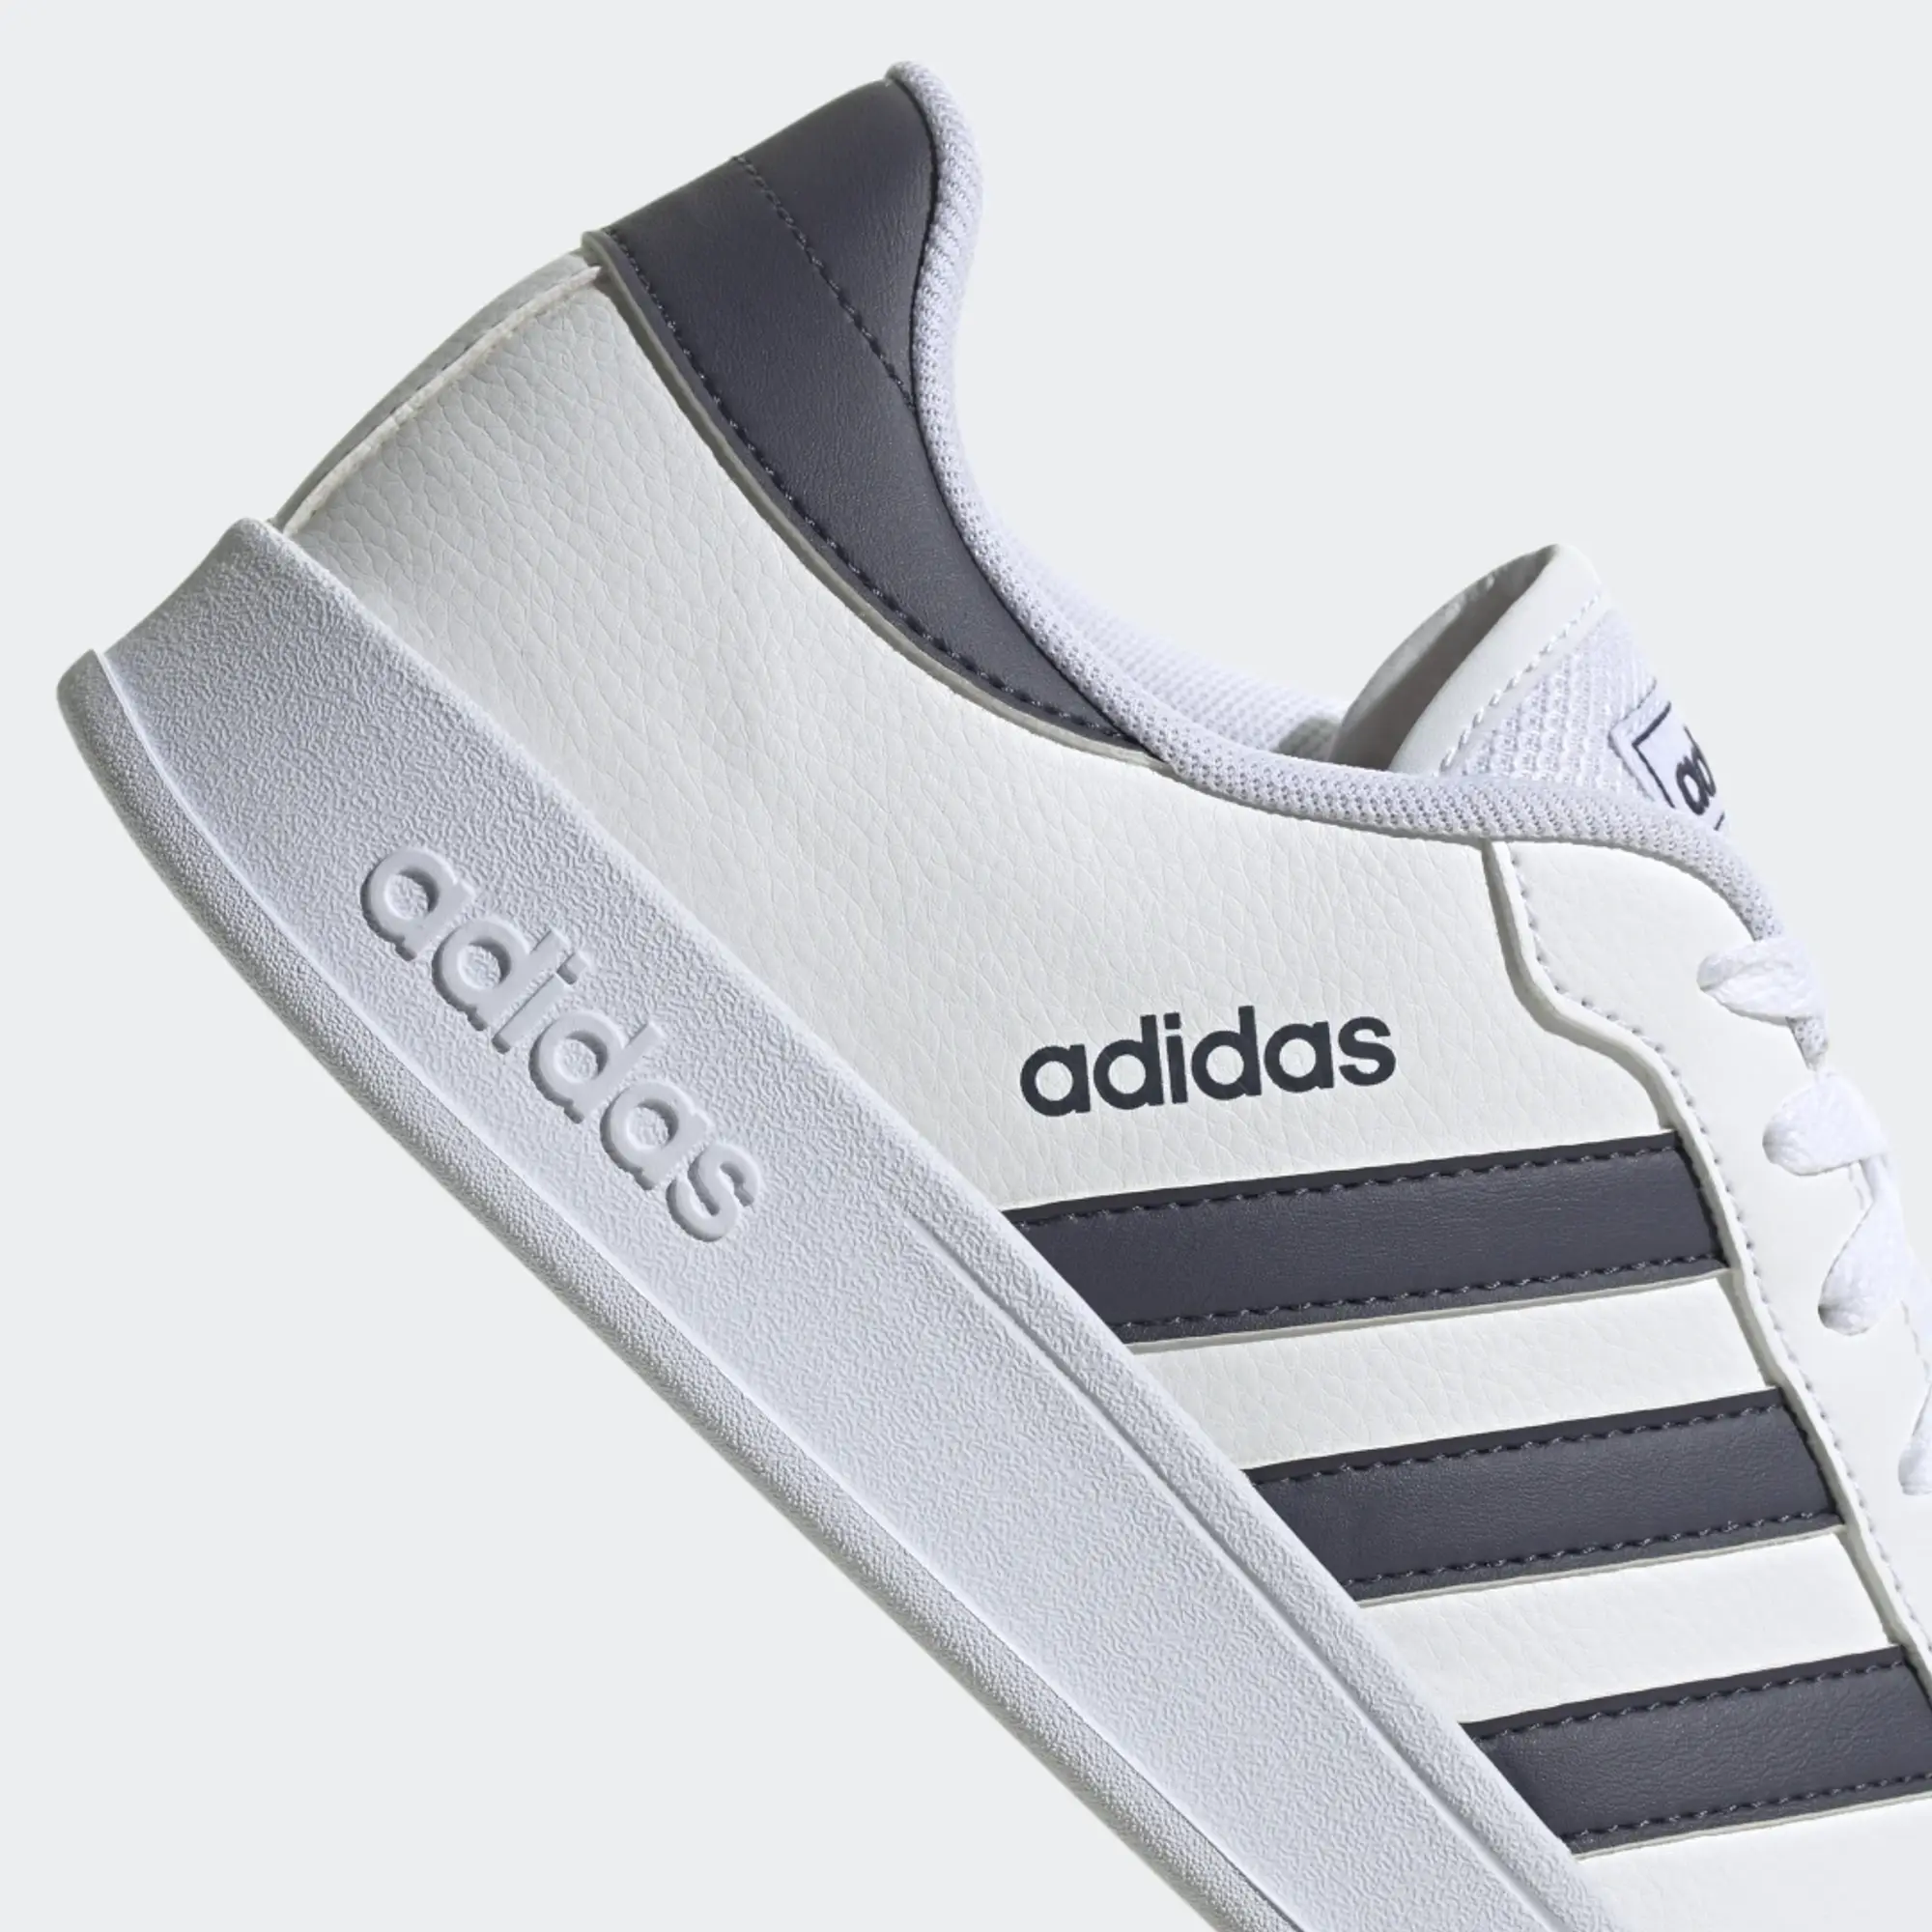 adidas Mens Breaknet Trainers in White Navy - Blue & White